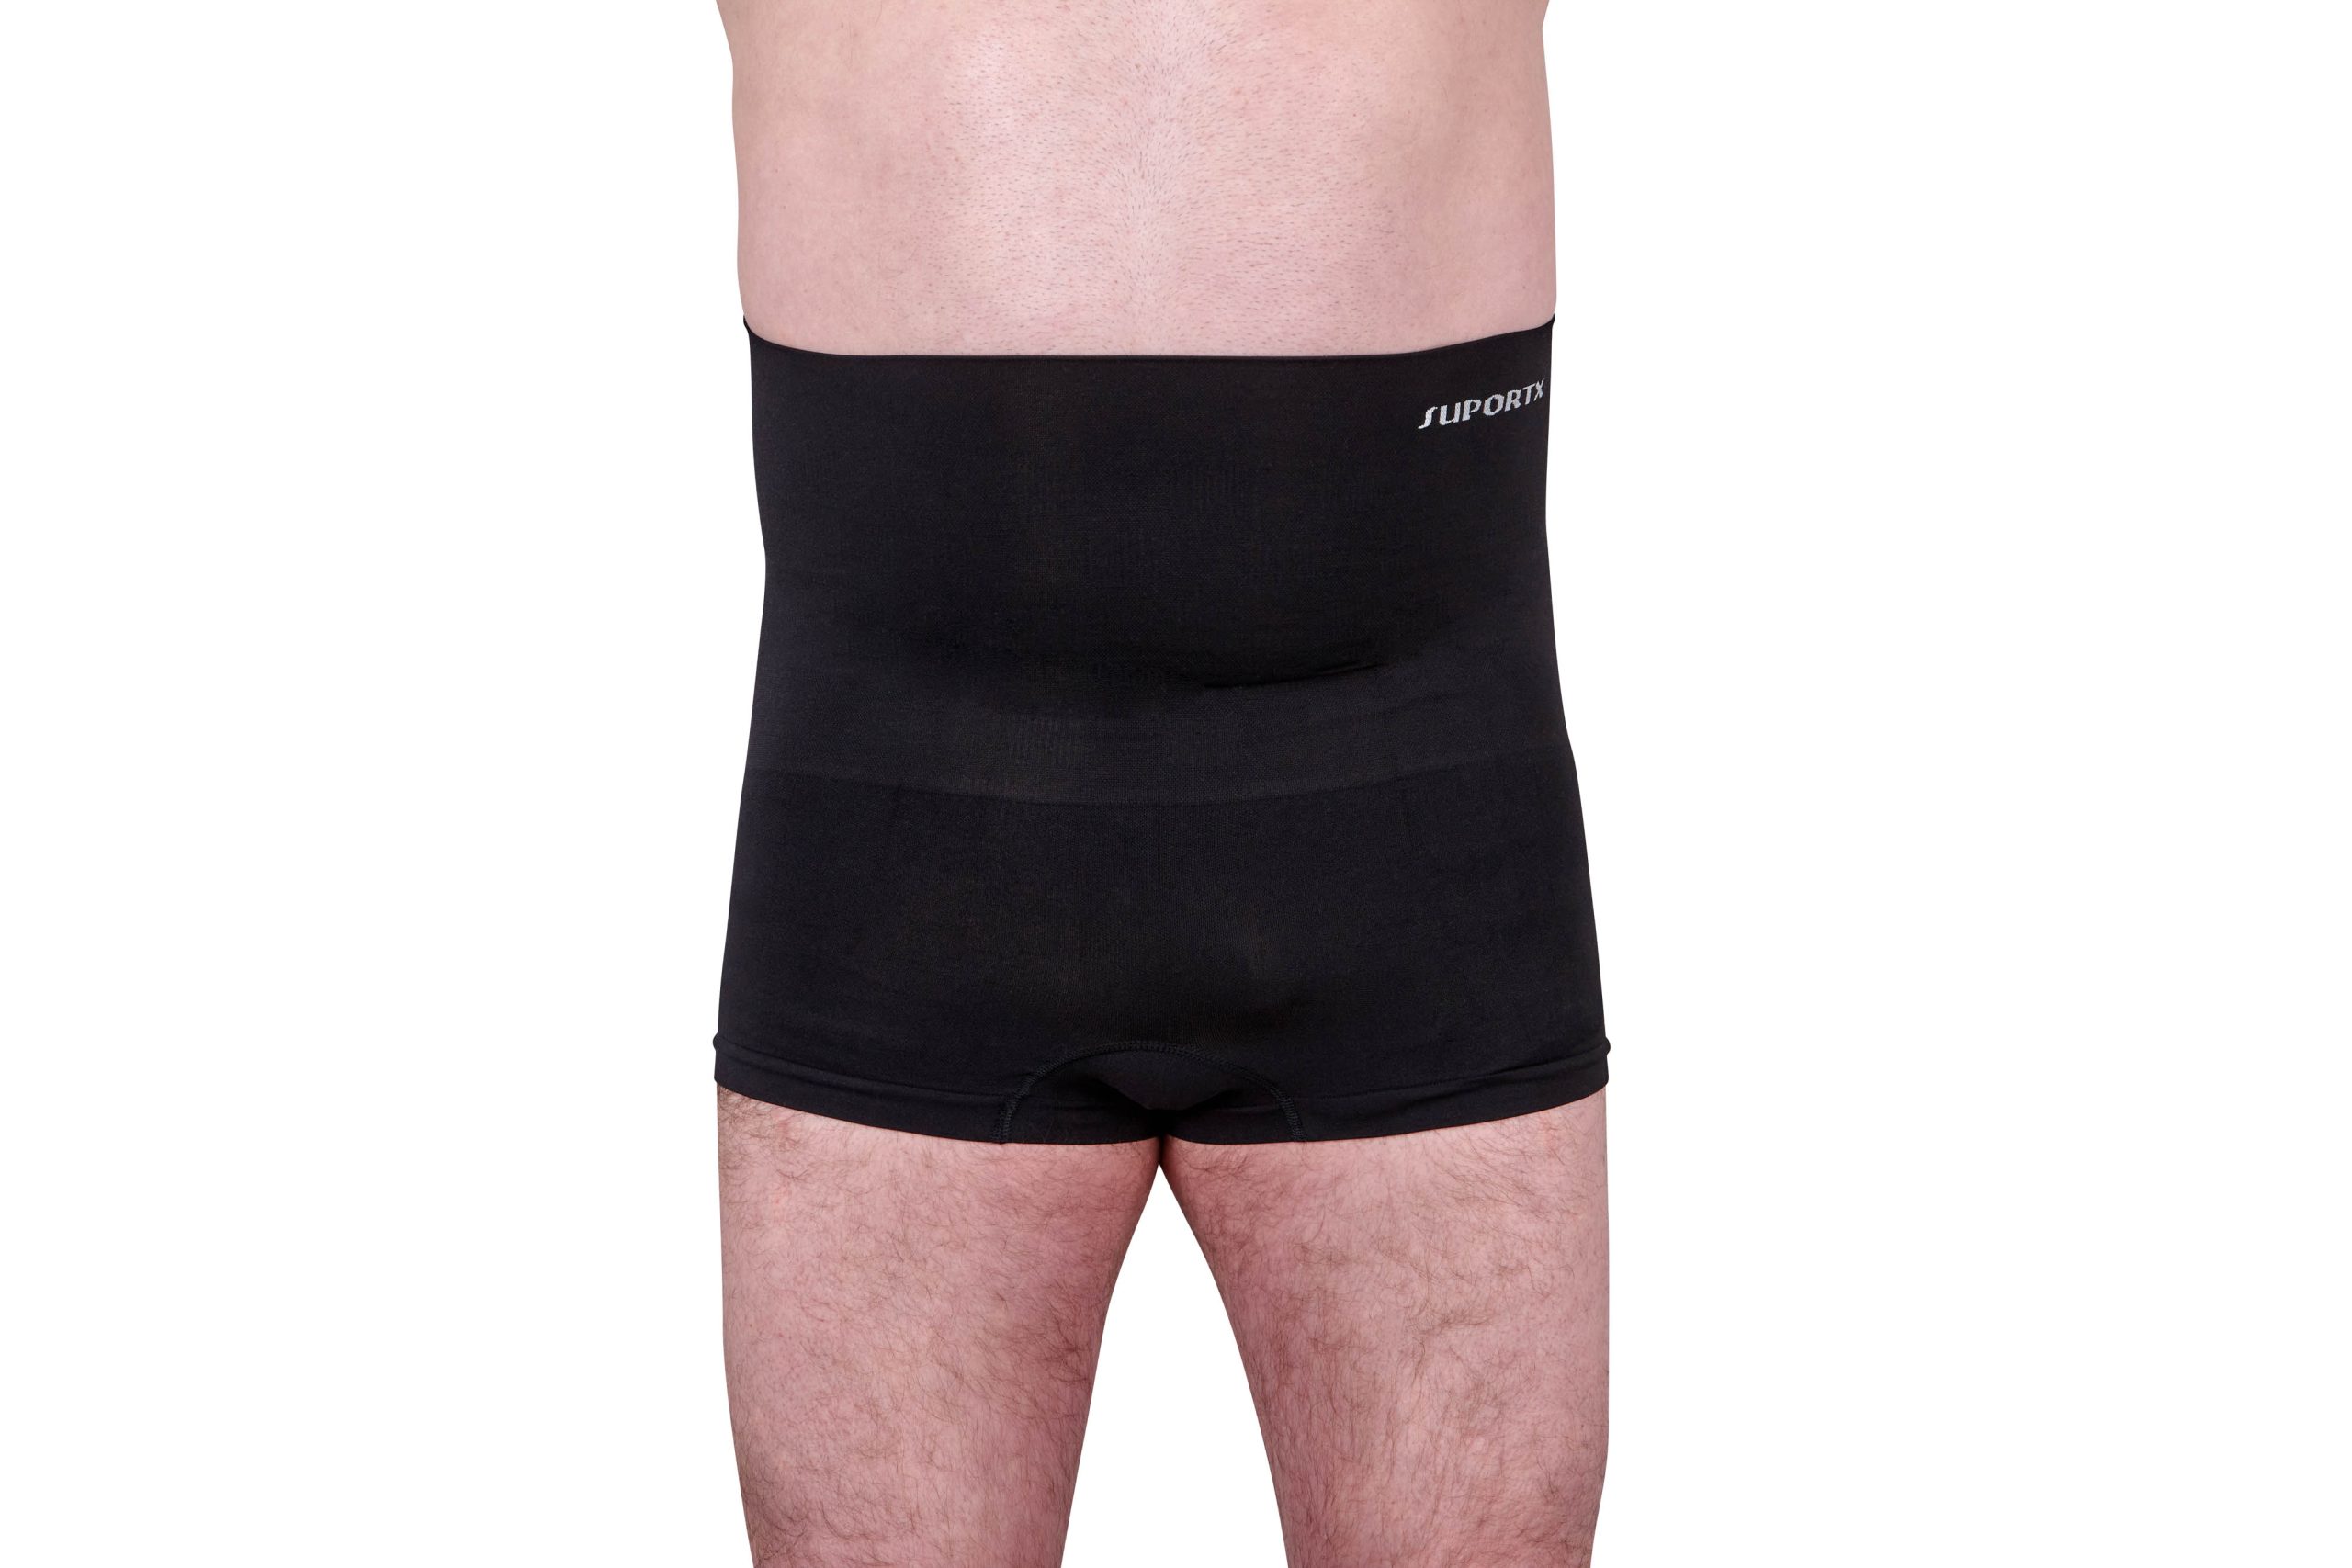 Buy Suportx Breathable - Hernia Support Briefs at Medical Monks!